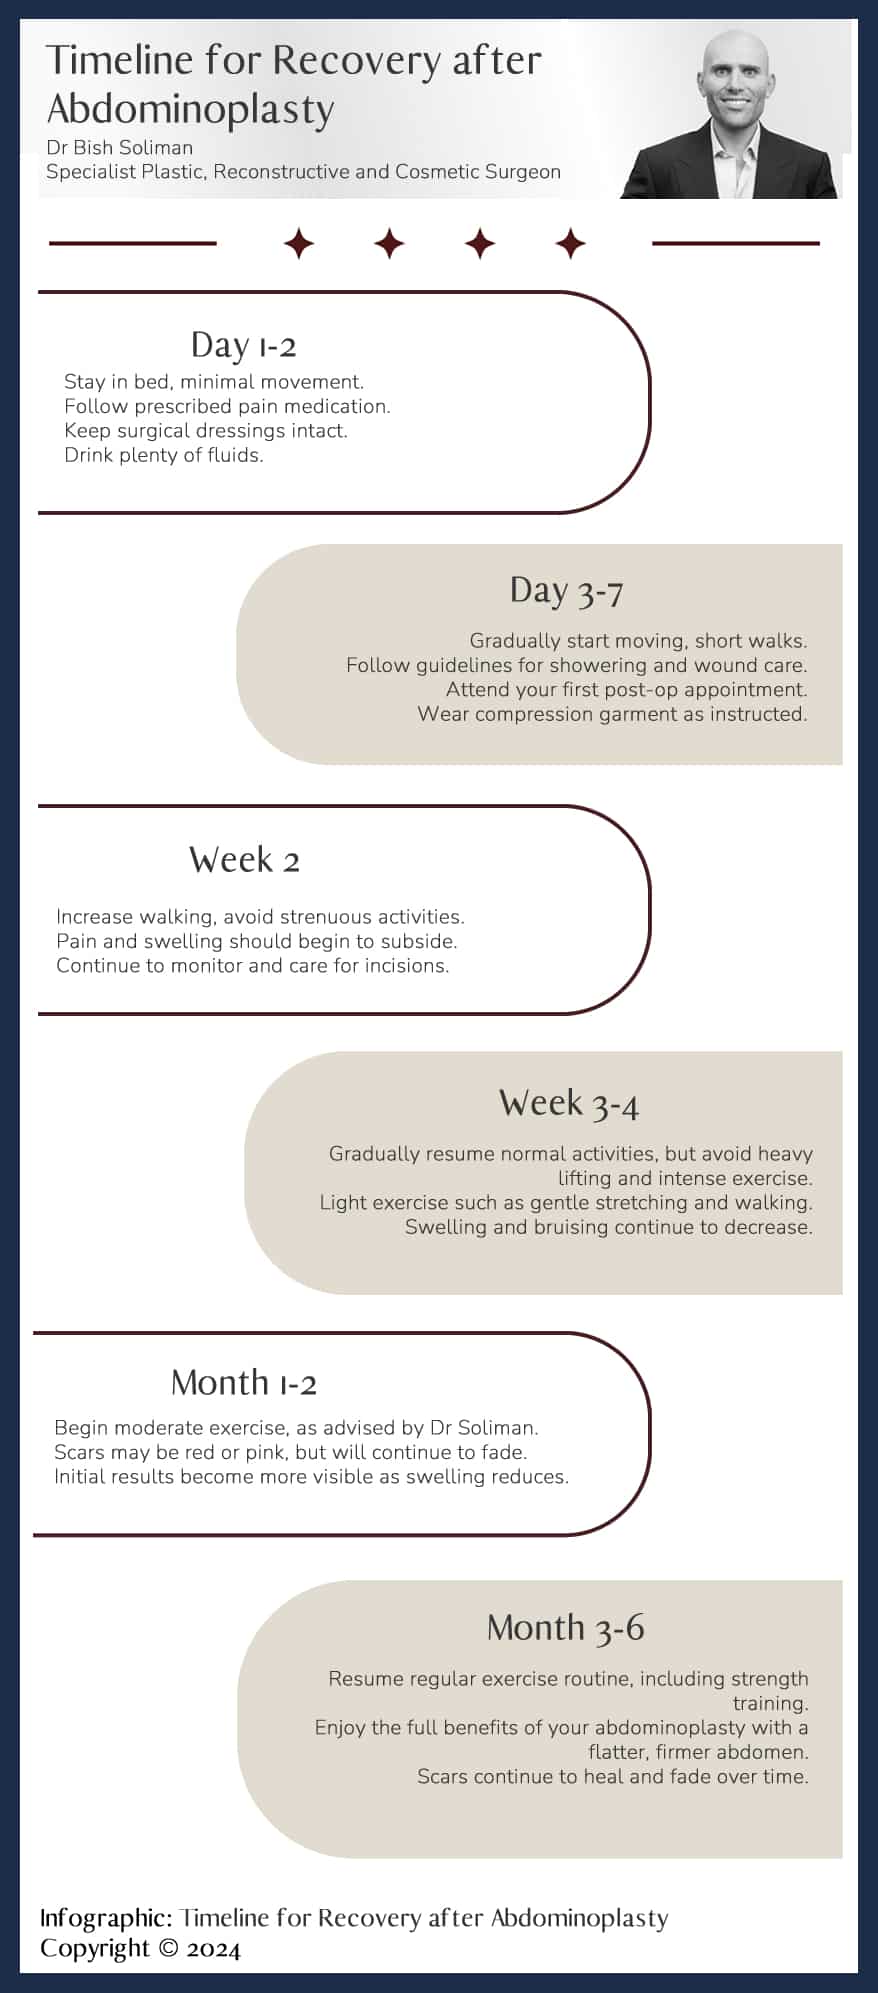 Infografic Dr Soliman - Timeline for Recovery after Abdominoplasty